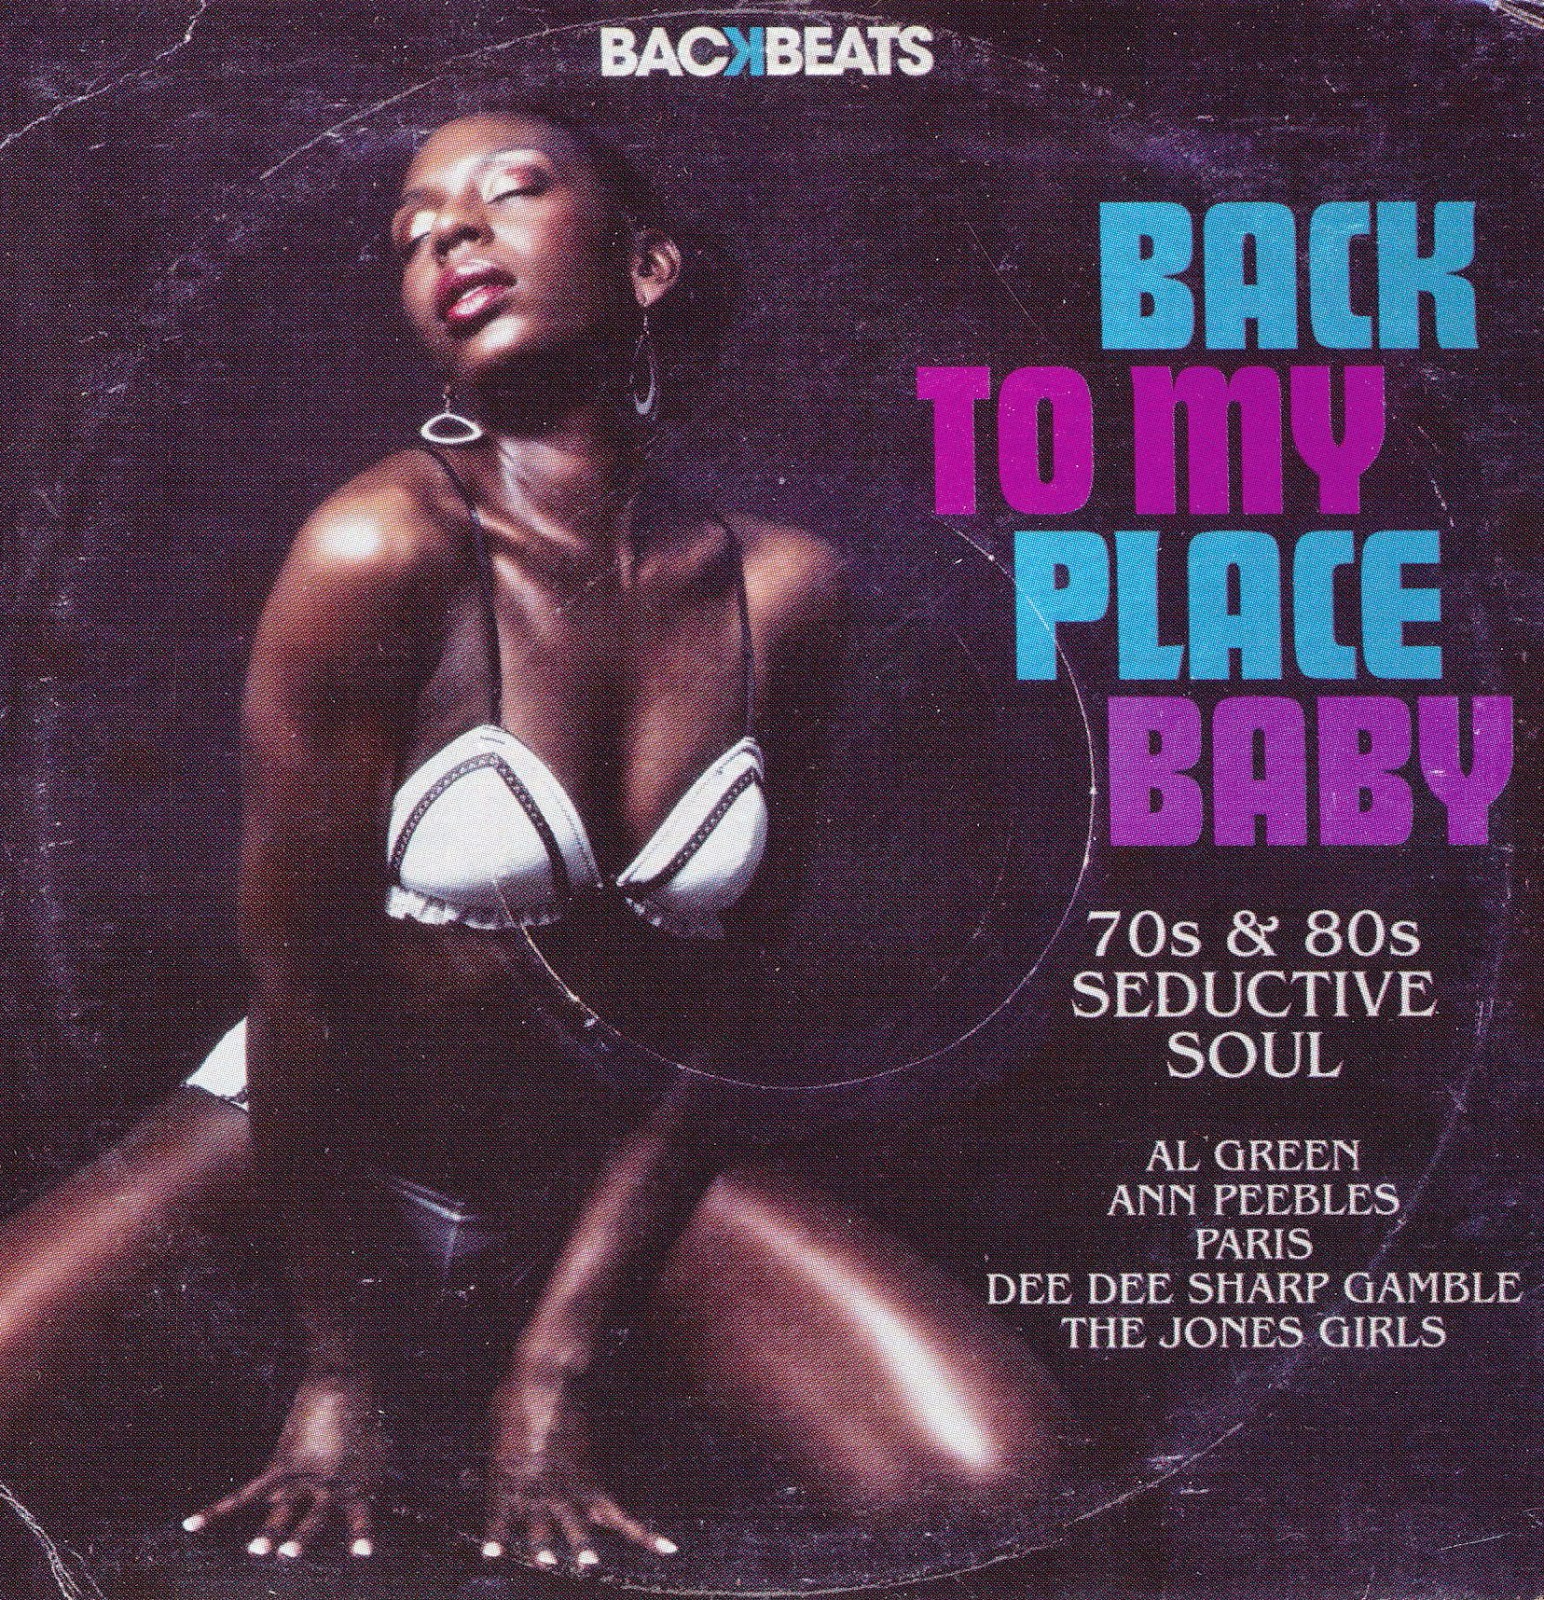 Песни baby back. Back to my place Baby. 80s Soul album Covers. Ann Peebles i can't Stand the Rain. 70s RADIOTUNES Soul.